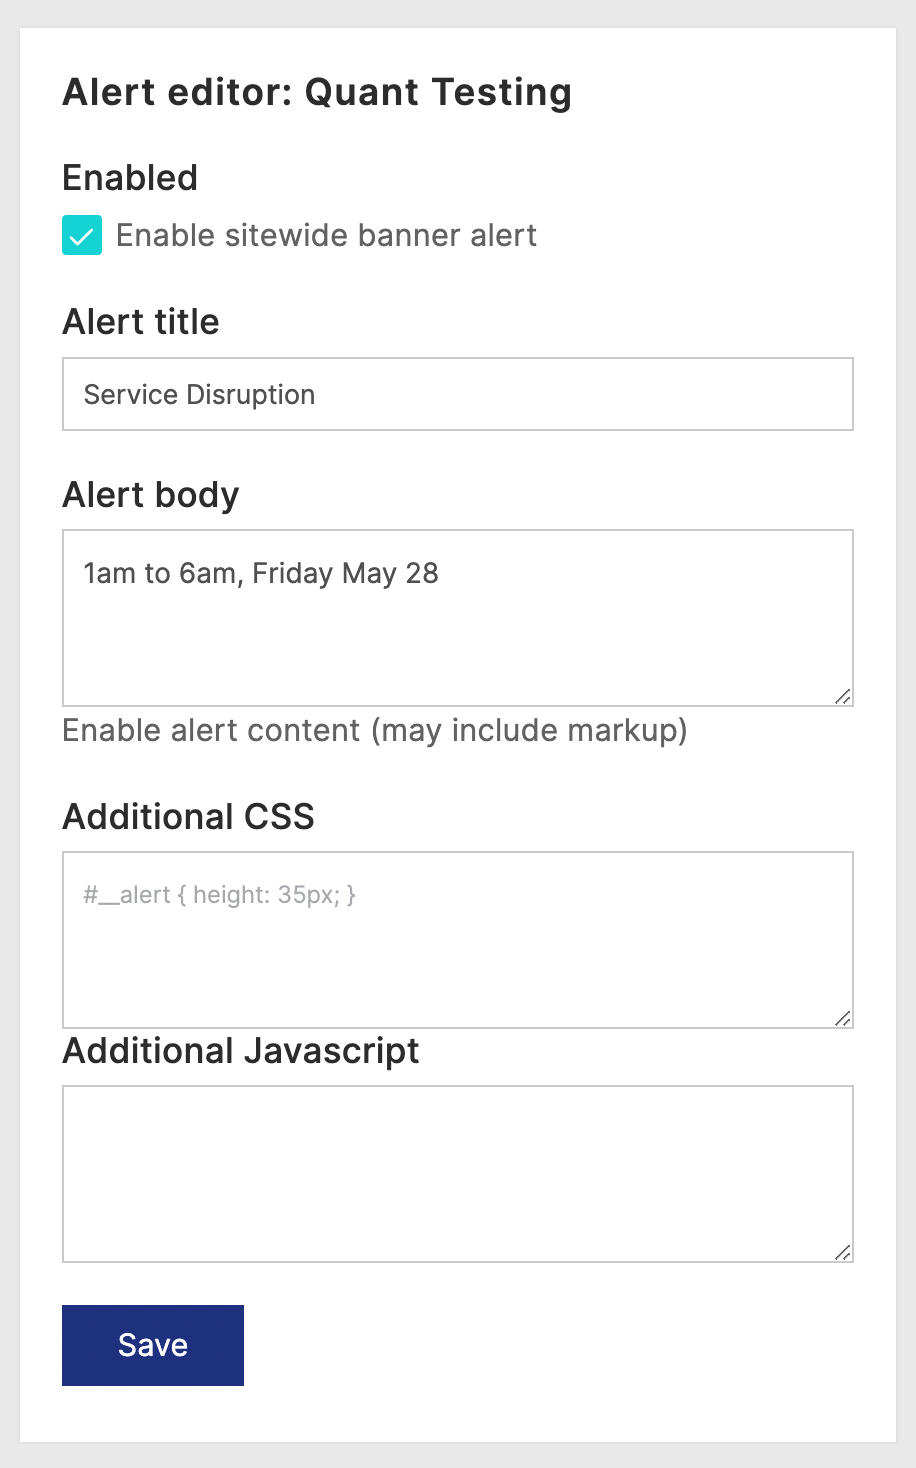 Quant Alert editor form with title and body